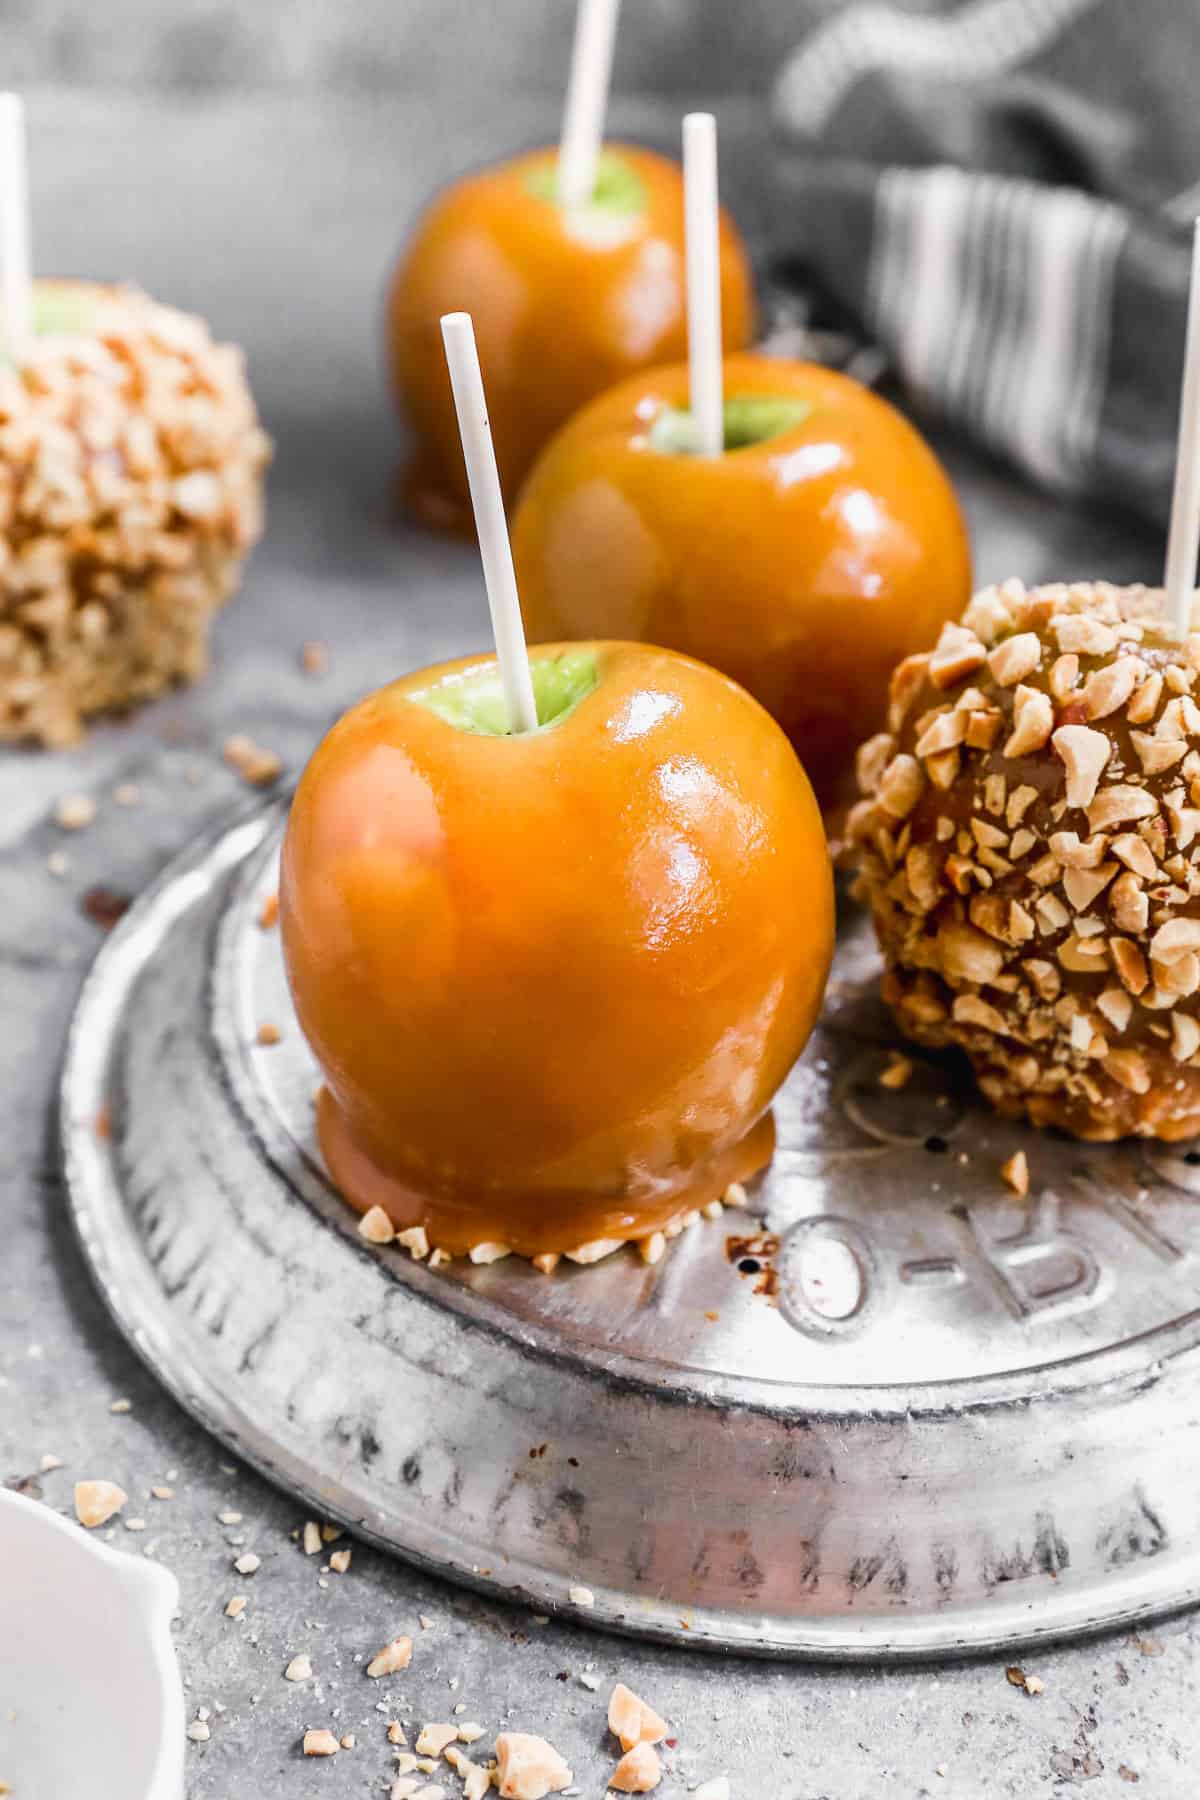 A close up image of three caramel apples on an upside down pie plate, one of them covered with chopped nuts.